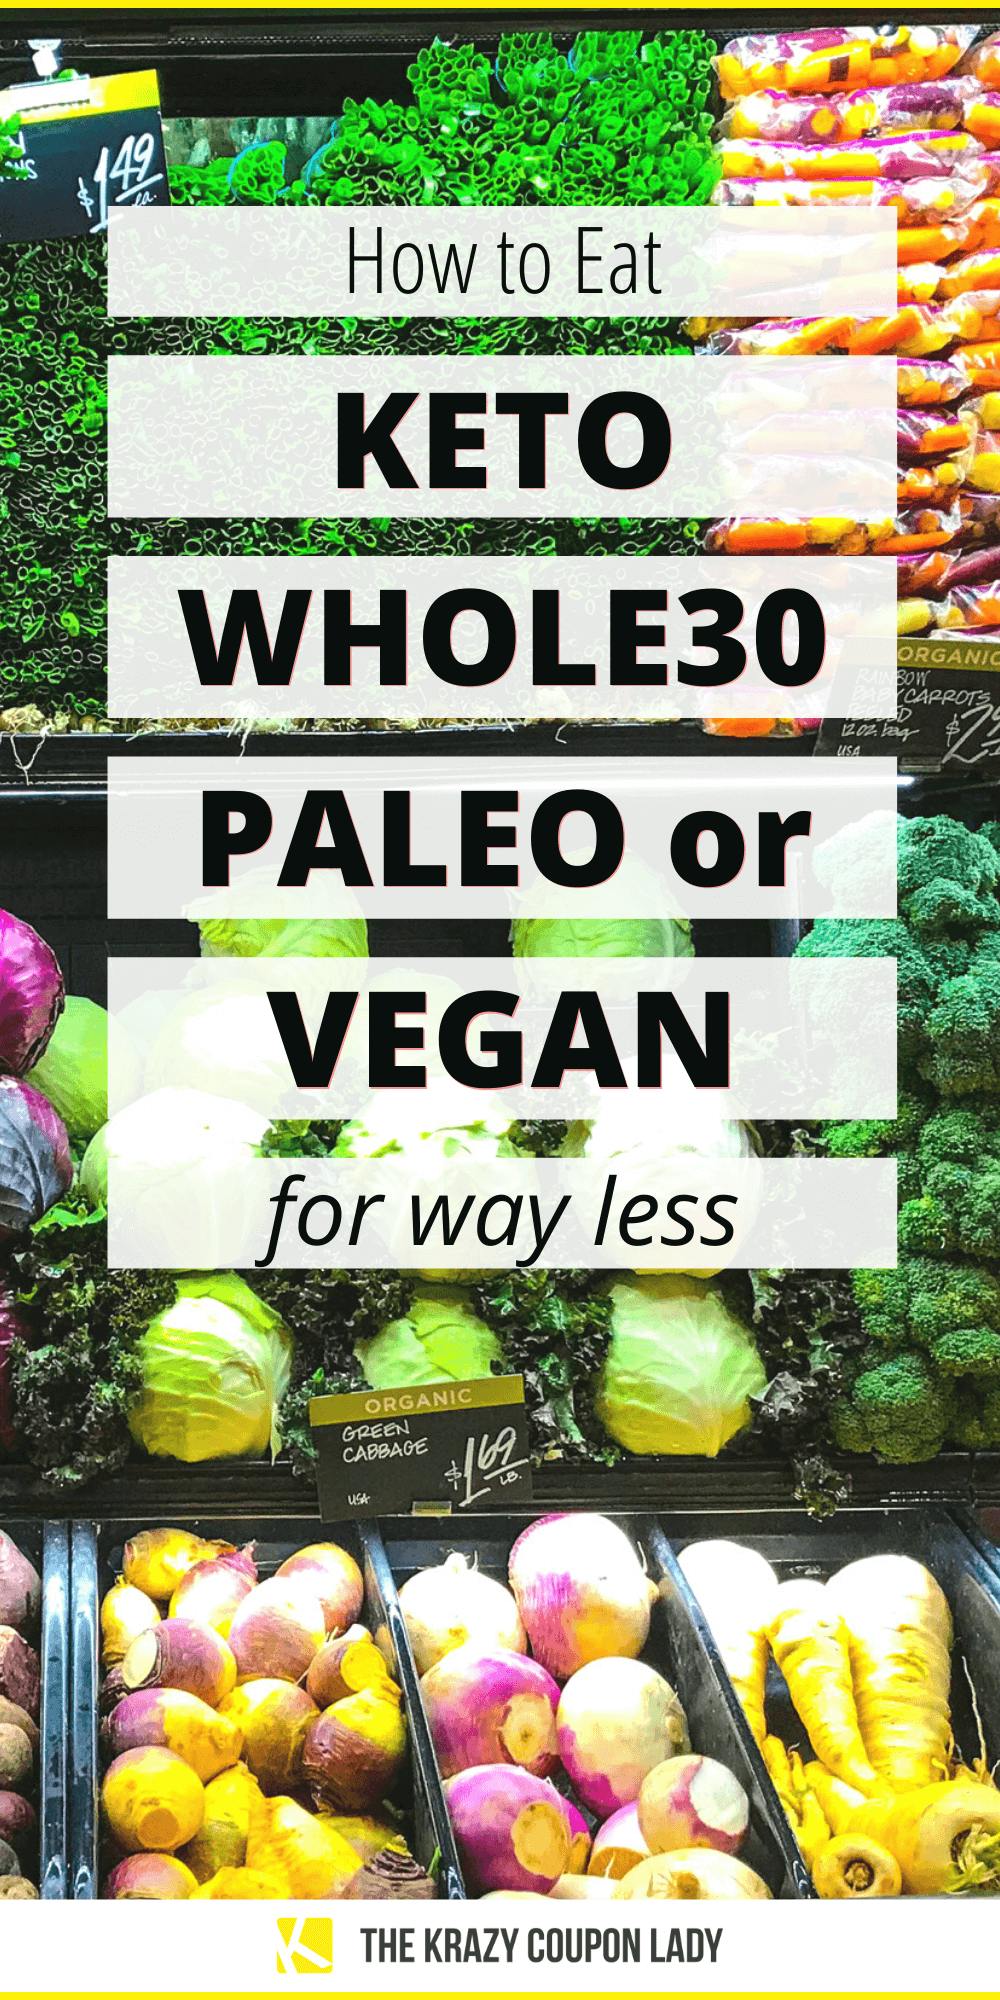 12 Money-Saving Tips for People on Keto, Whole30, Paleo & Vegan Diets